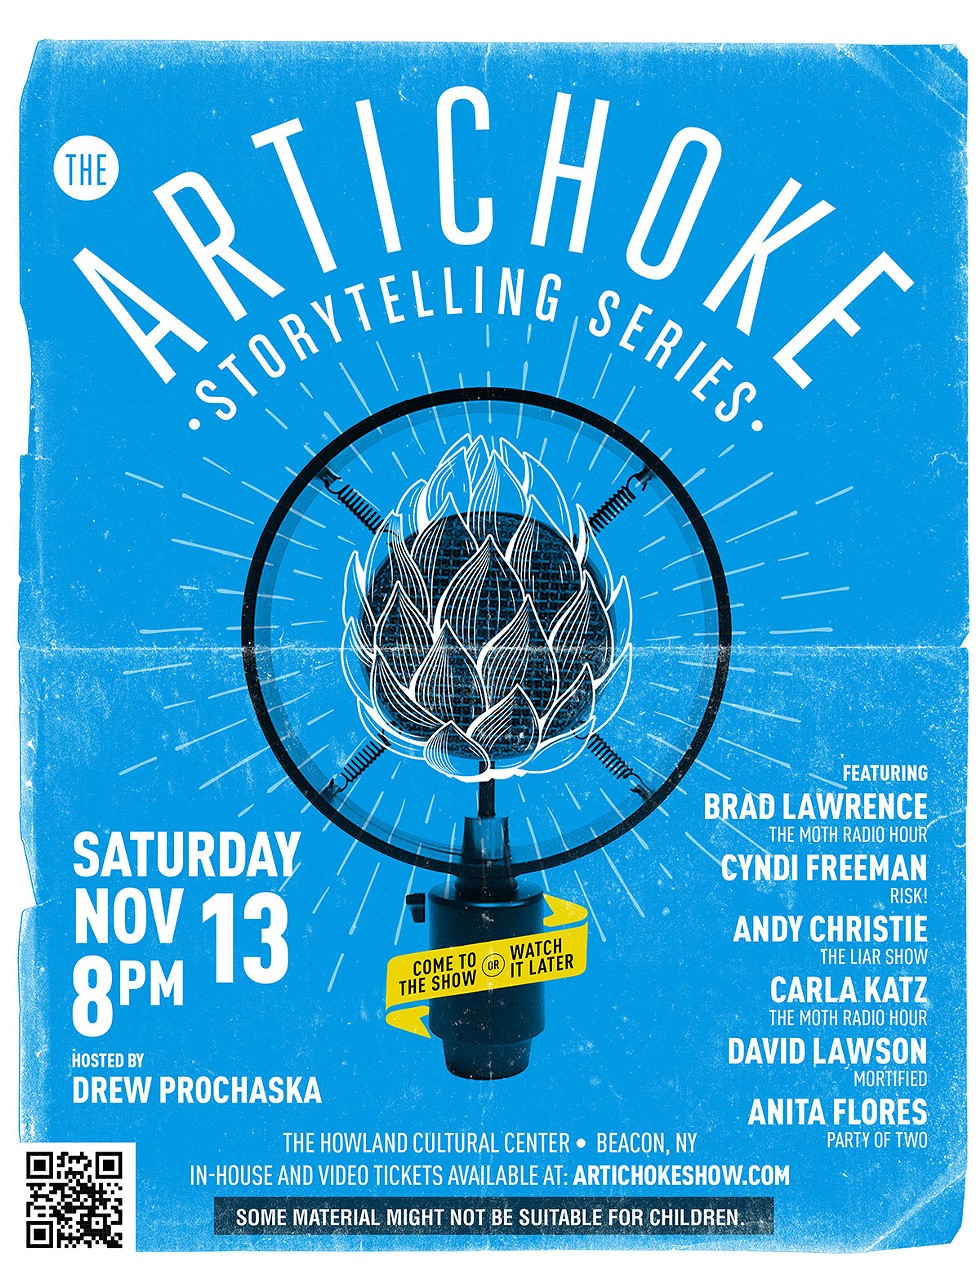 The Artichoke Storytelling Series Live at The Howland!